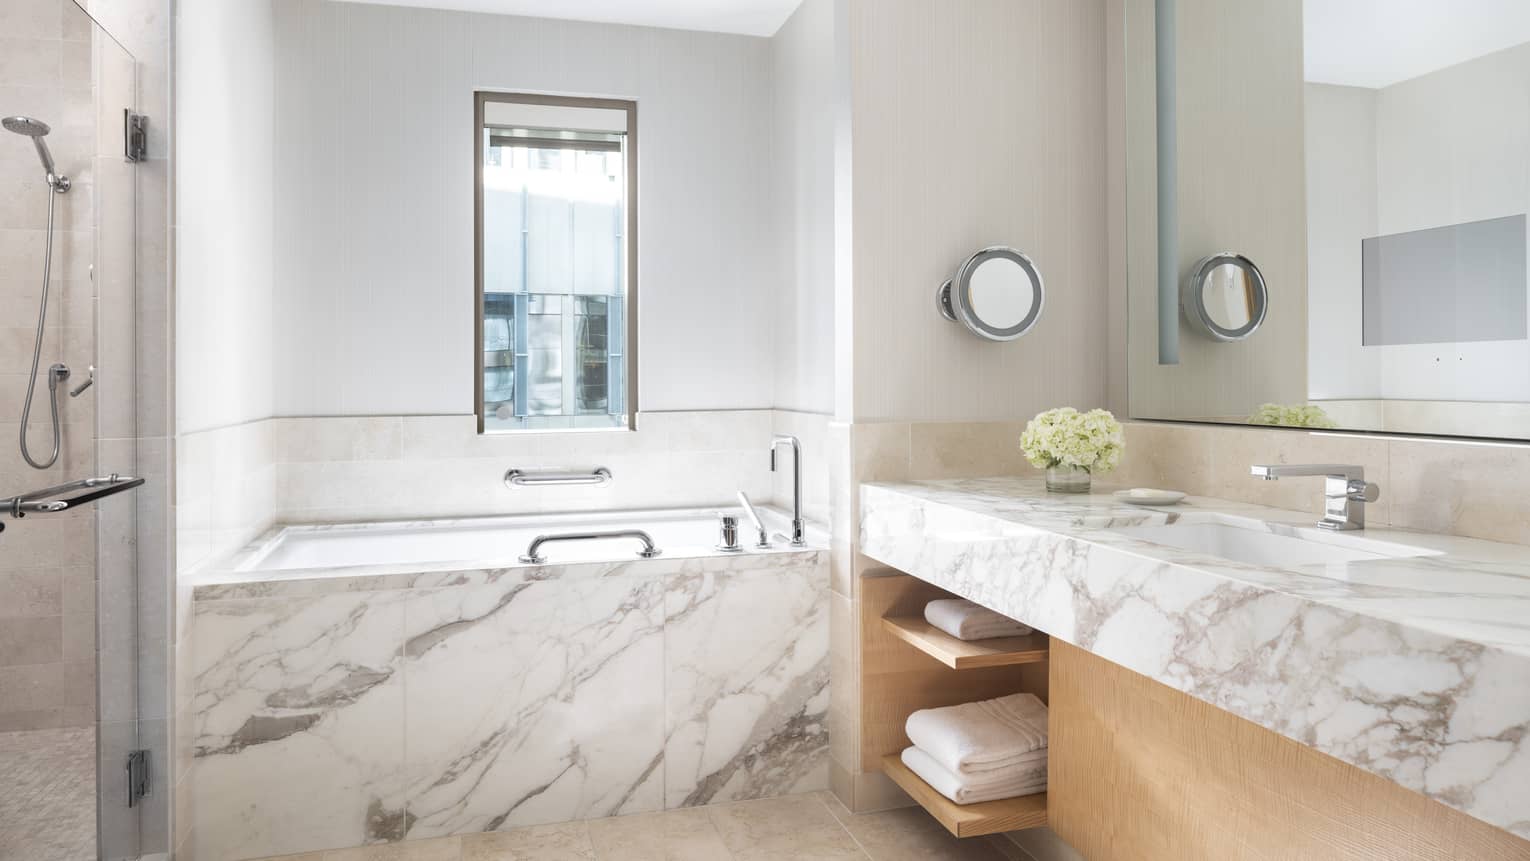 Marble counter and a marble bathtub gleam in a bathroom